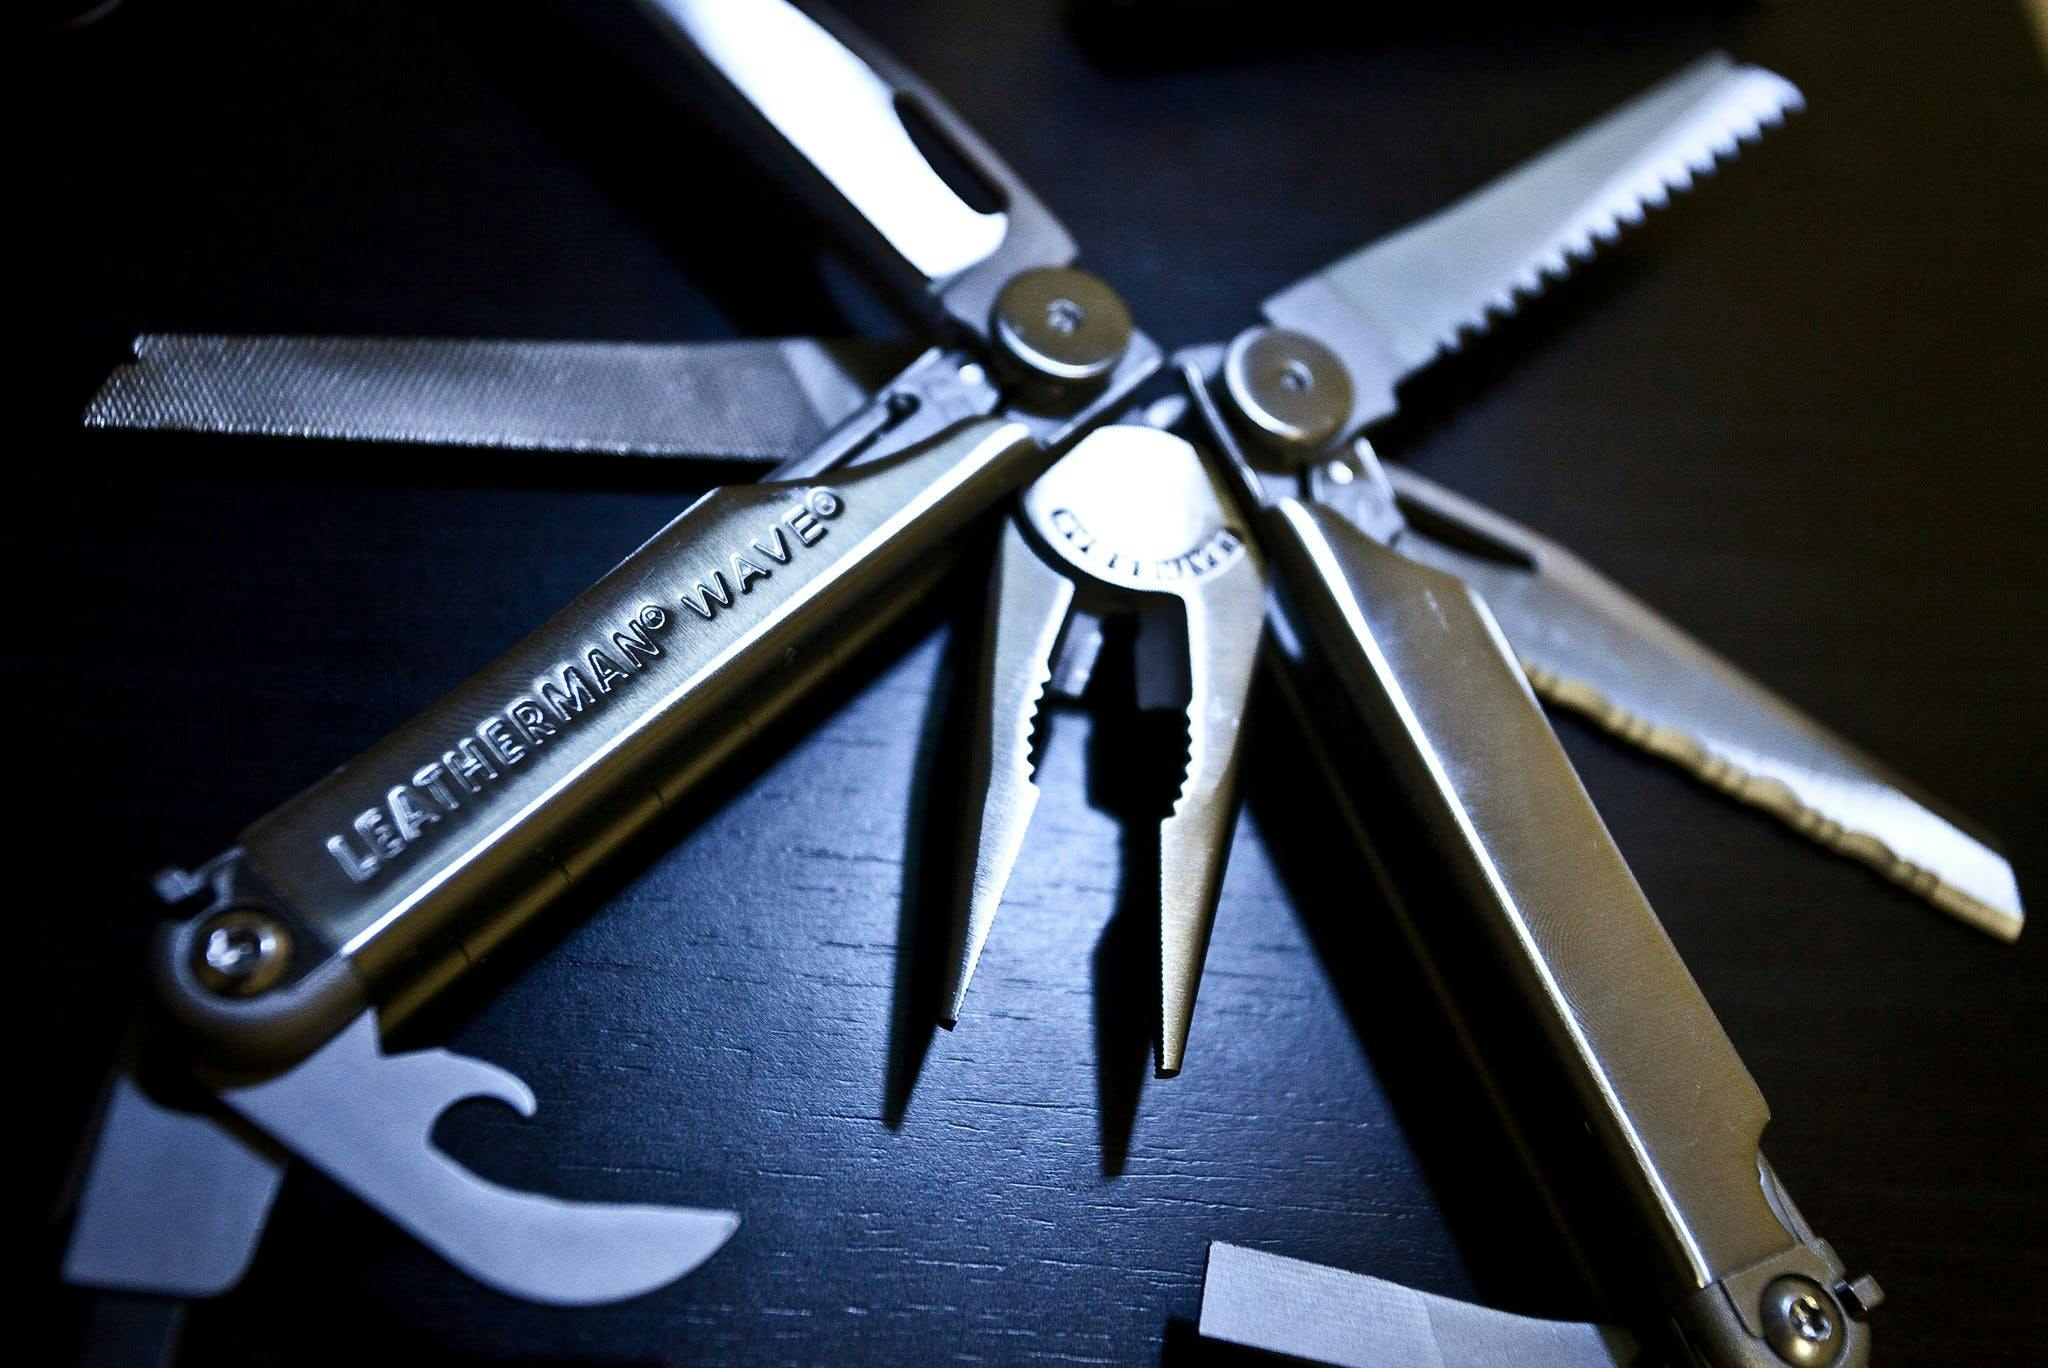 "Leatherman Wave (EDC)" by zomgitsbrian is licensed under CC BY 4.0 https://www.flickr.com/photos/zomgitsbrian/4343170624